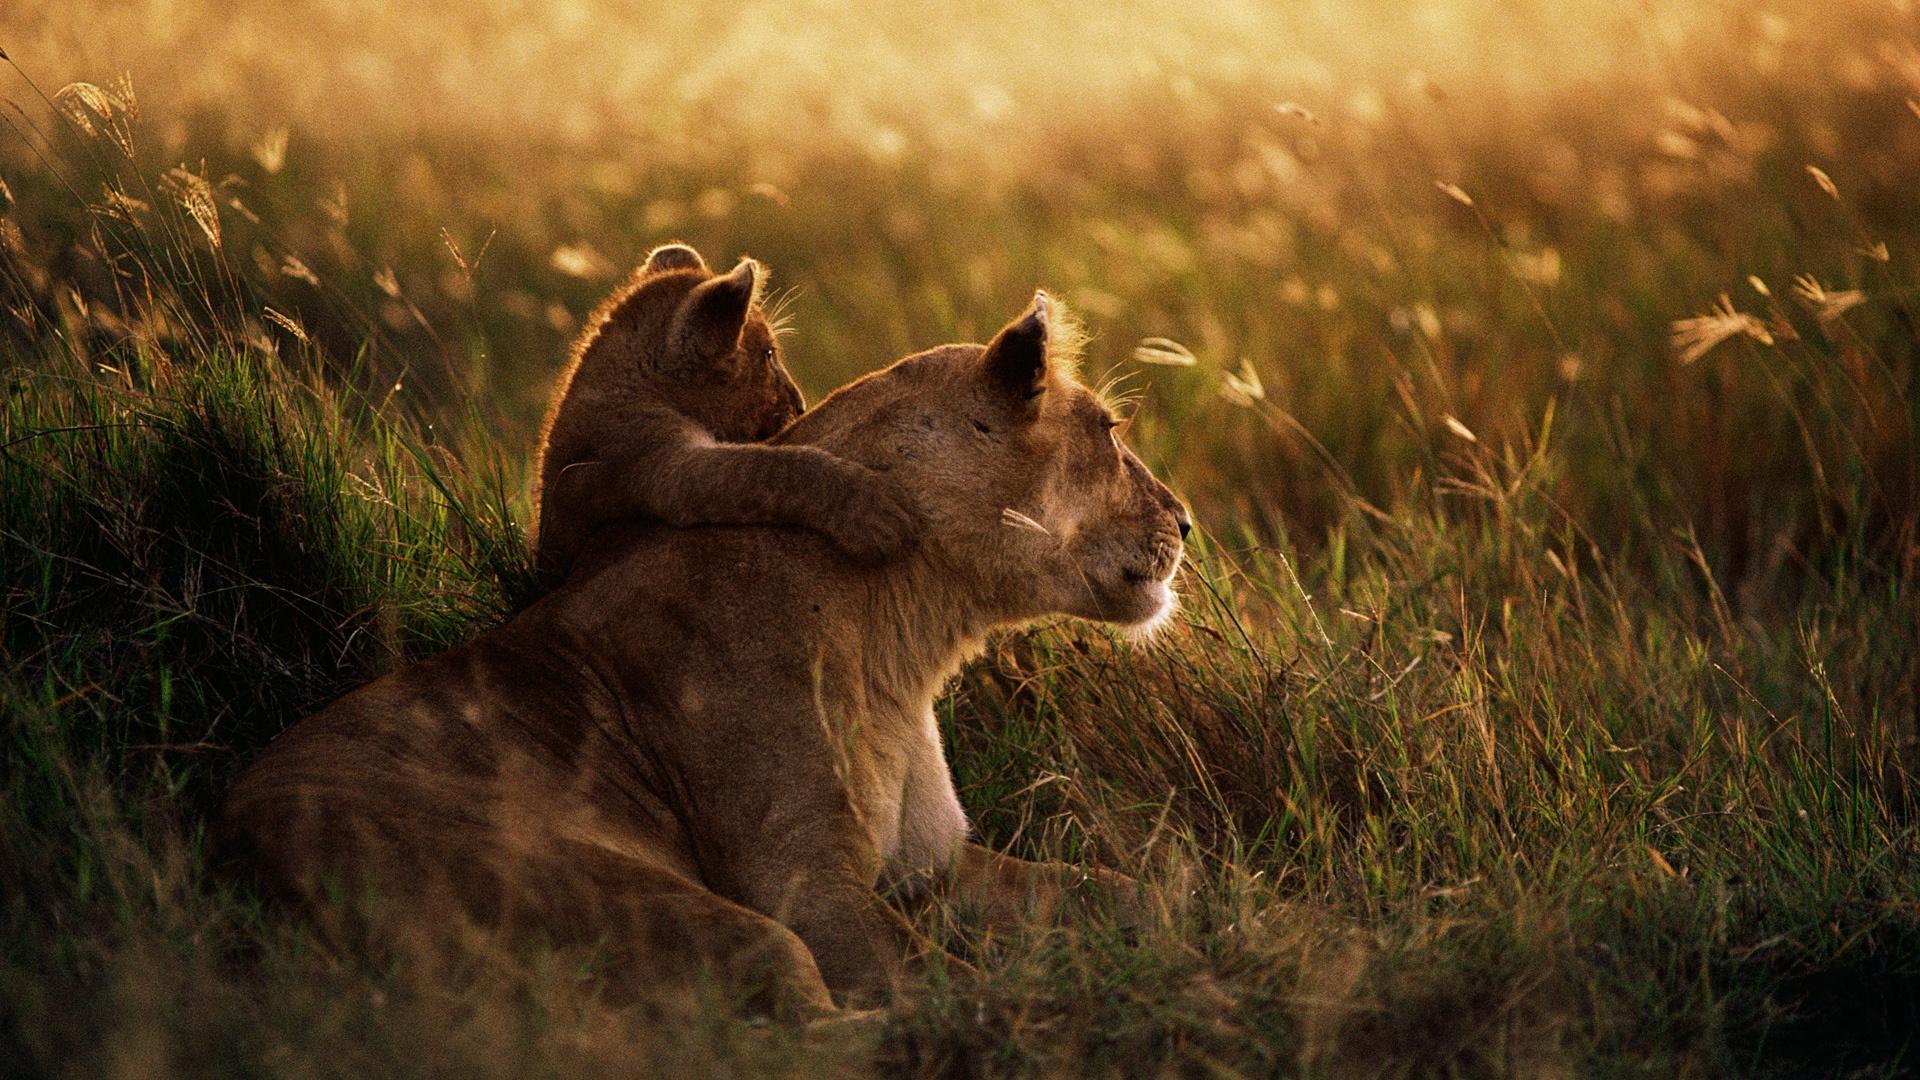 Lion lioness couple baby wallpaper Gallery